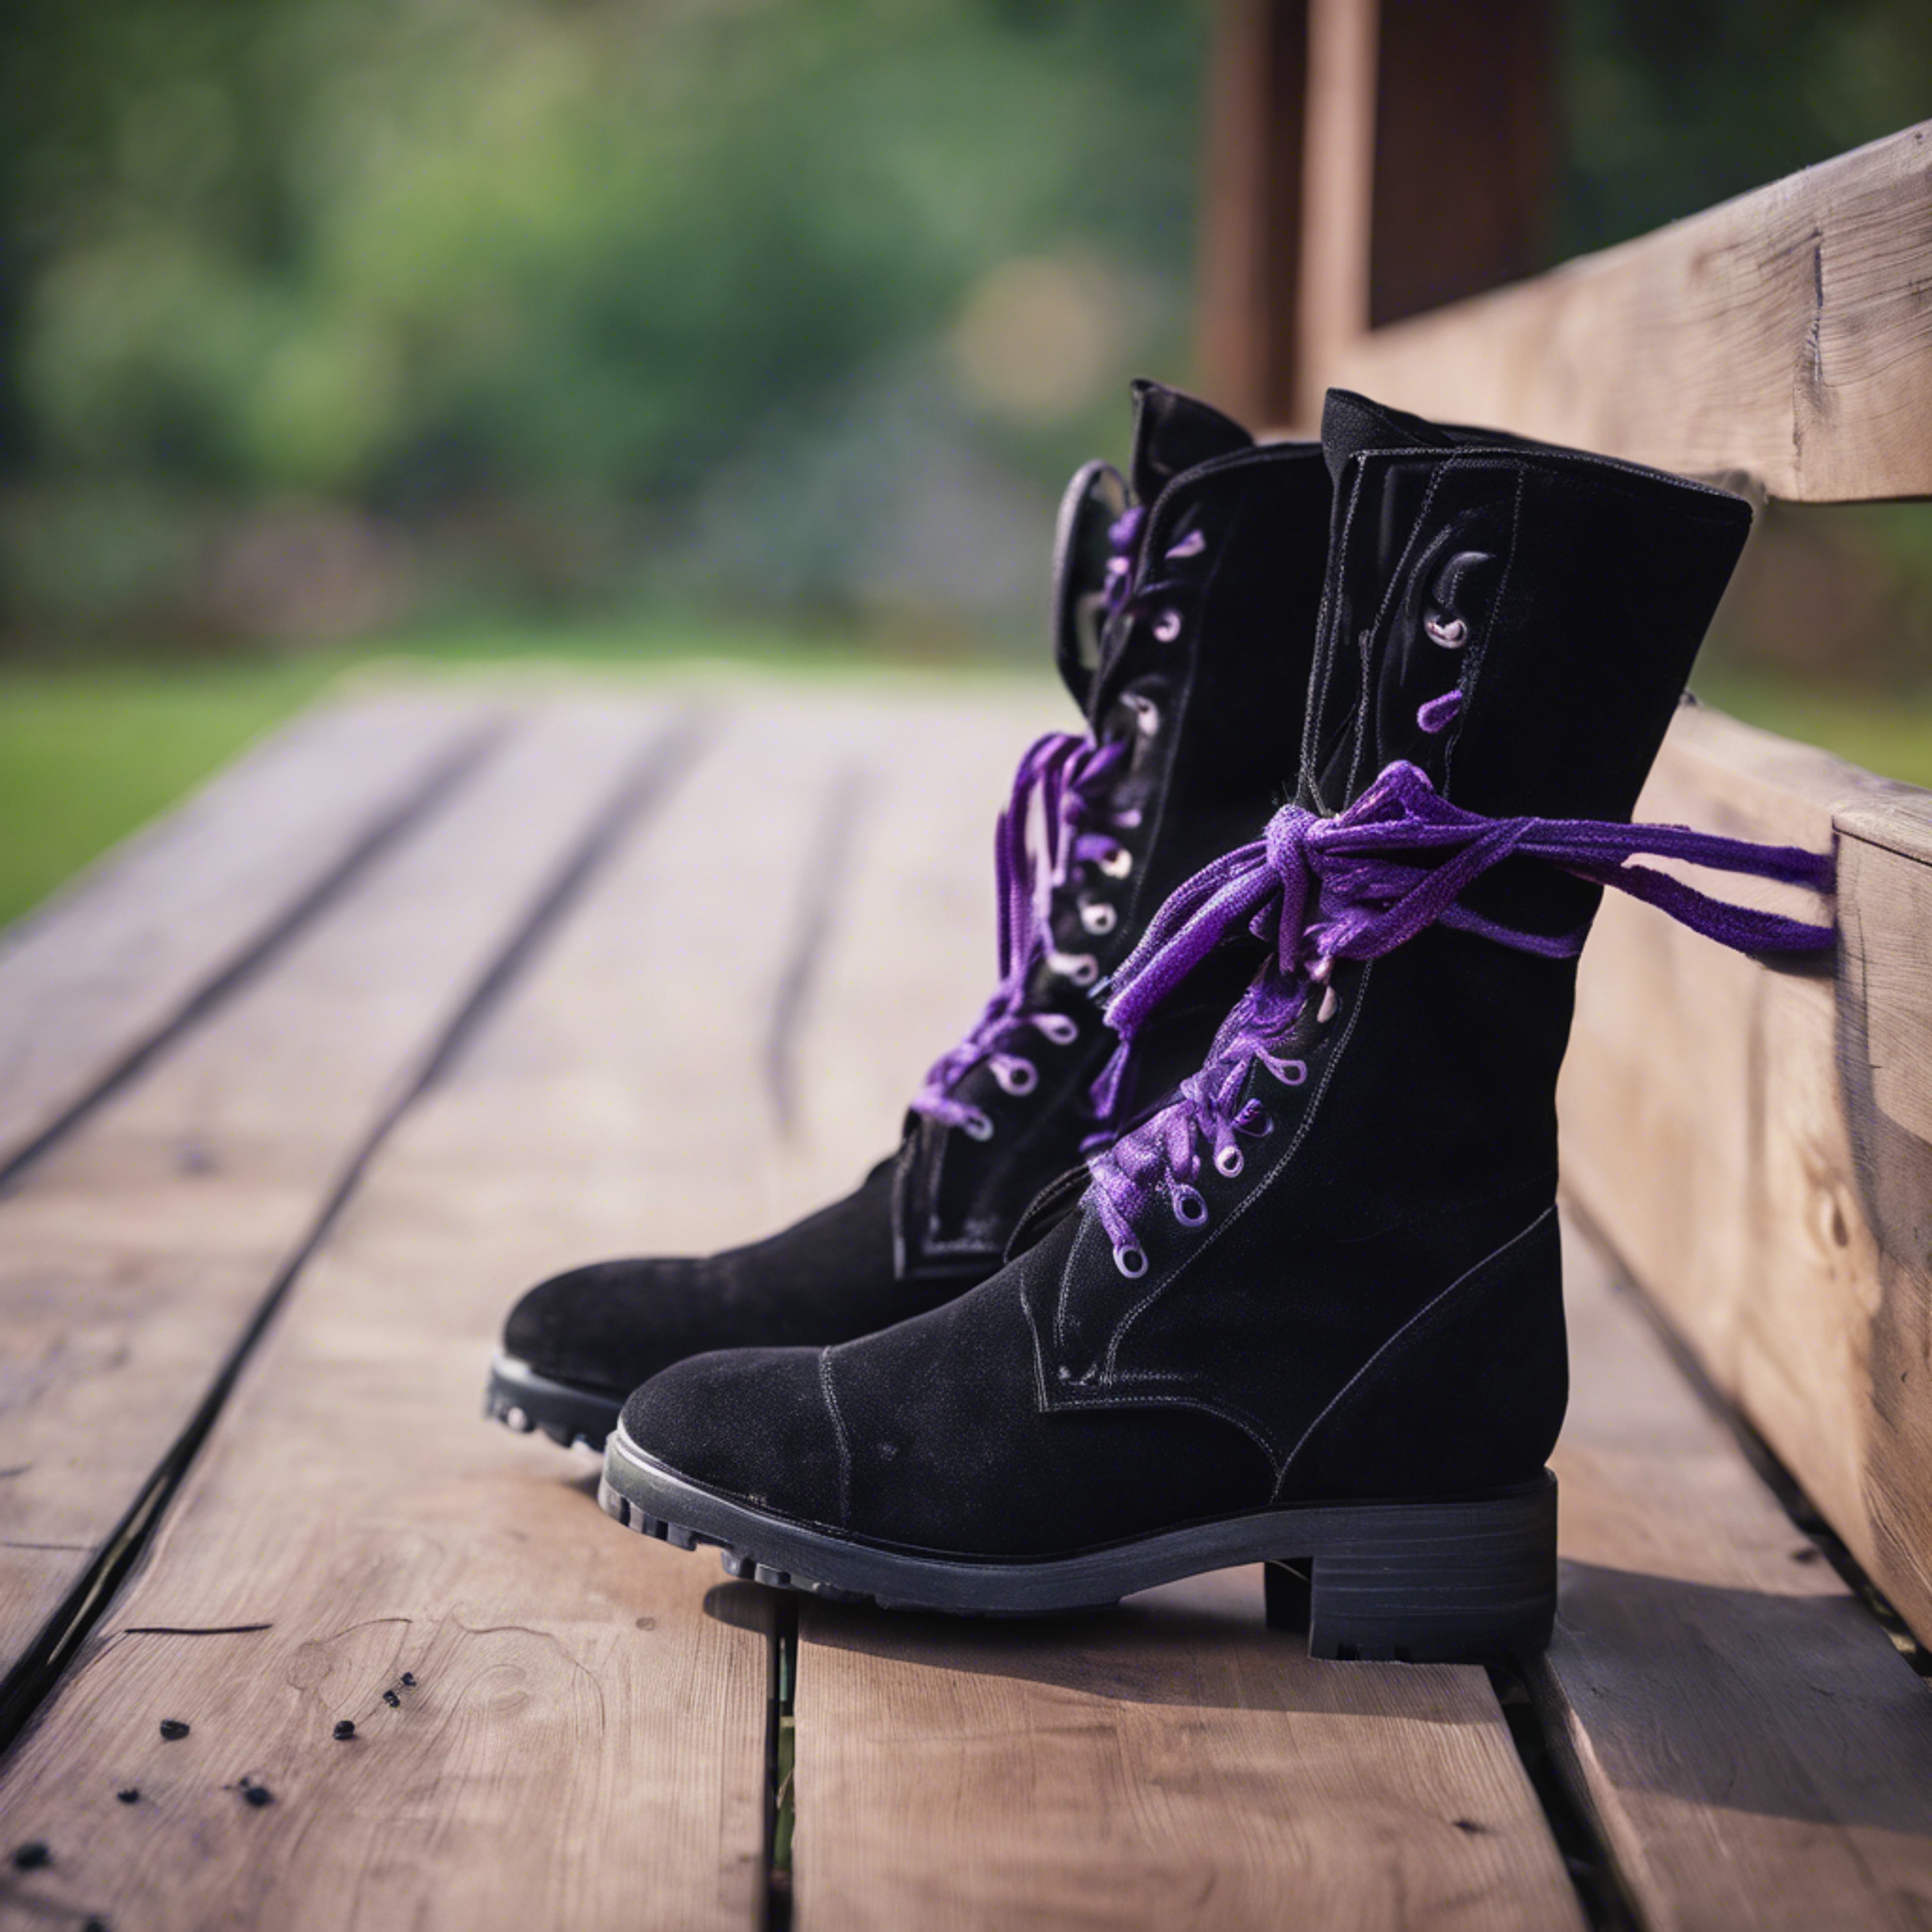 A pair of black suede boots with purple laces left casually on a wooden porch. Hintergrund[fedd81ee4b6b40088ba0]